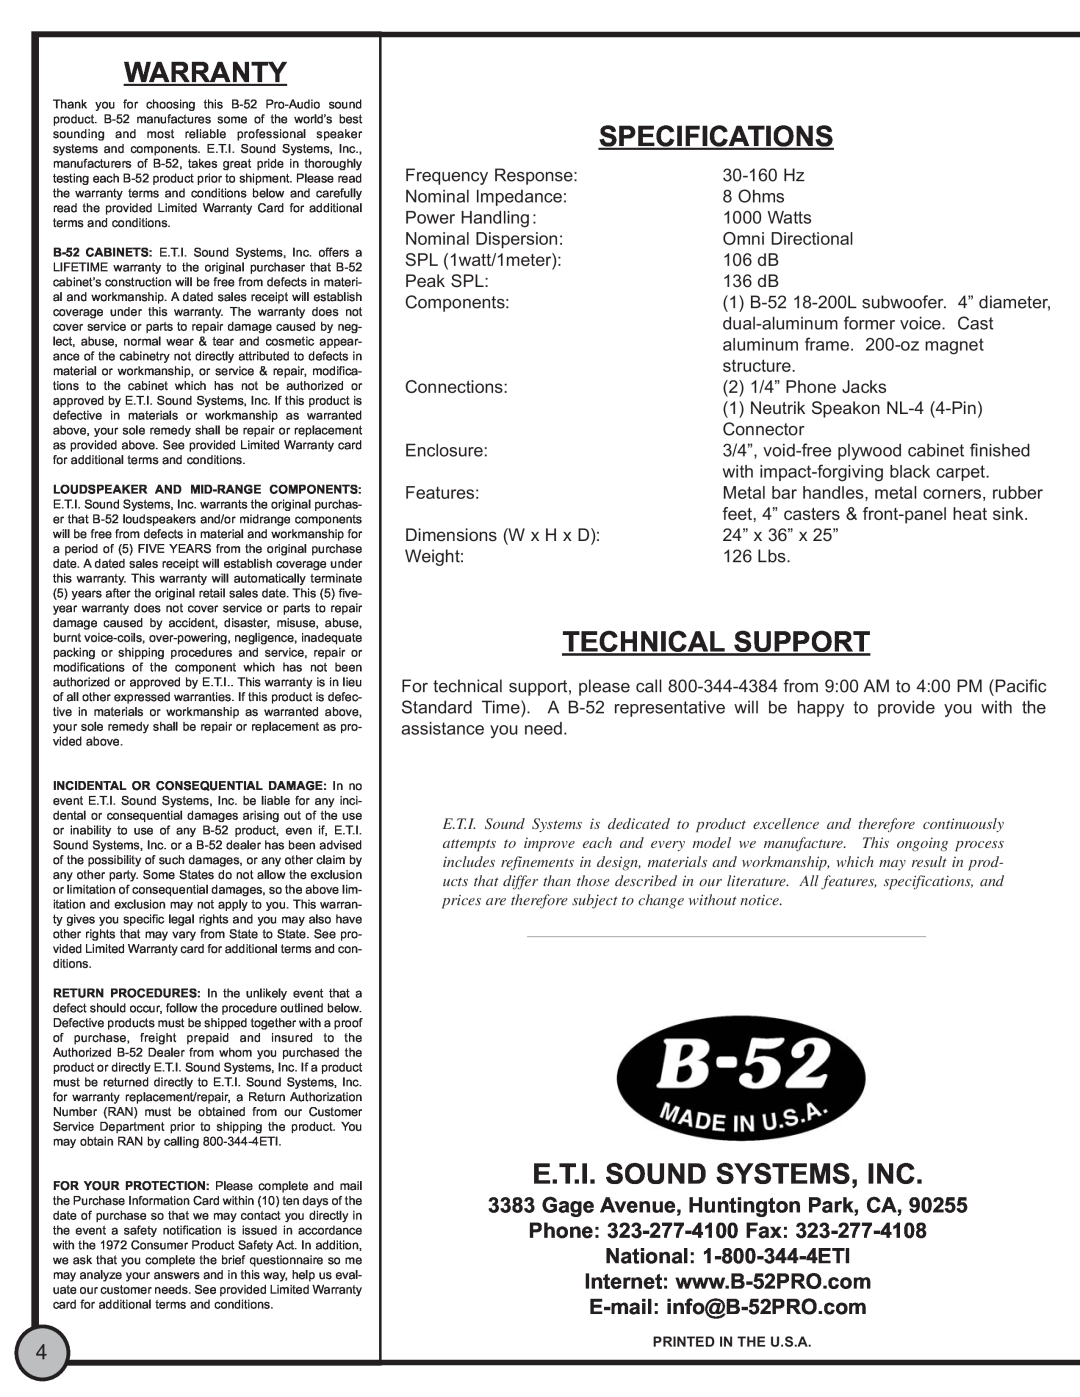 ETI Sound Systems, INC LX-18EV2 instruction manual Warranty, Specifications, Technical Support, E.T.I. Sound Systems, Inc 